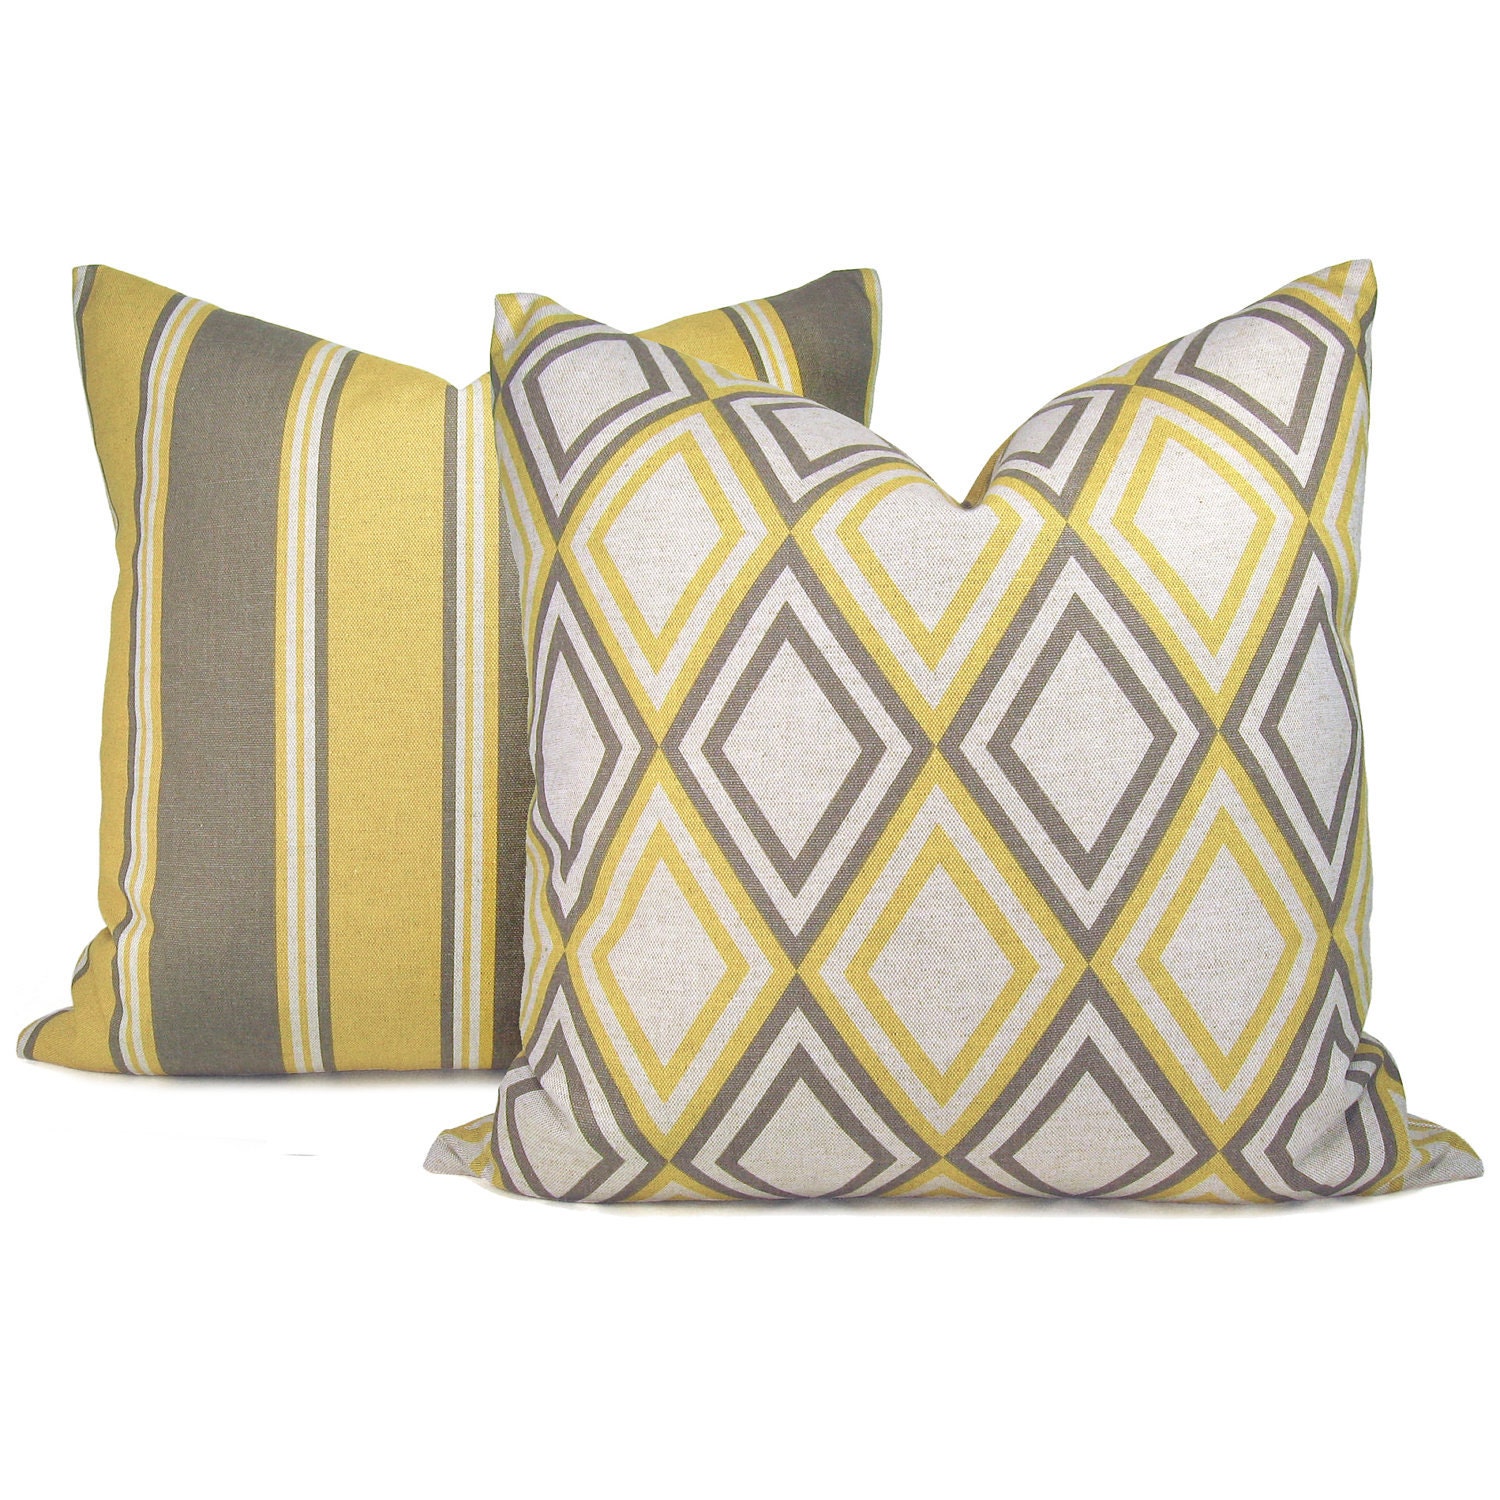 Modern Yellow and grey Geometric Pattern Reversible on Natural Linen Canvas 18 x 18 Cushion Covers - Set of Two (2)